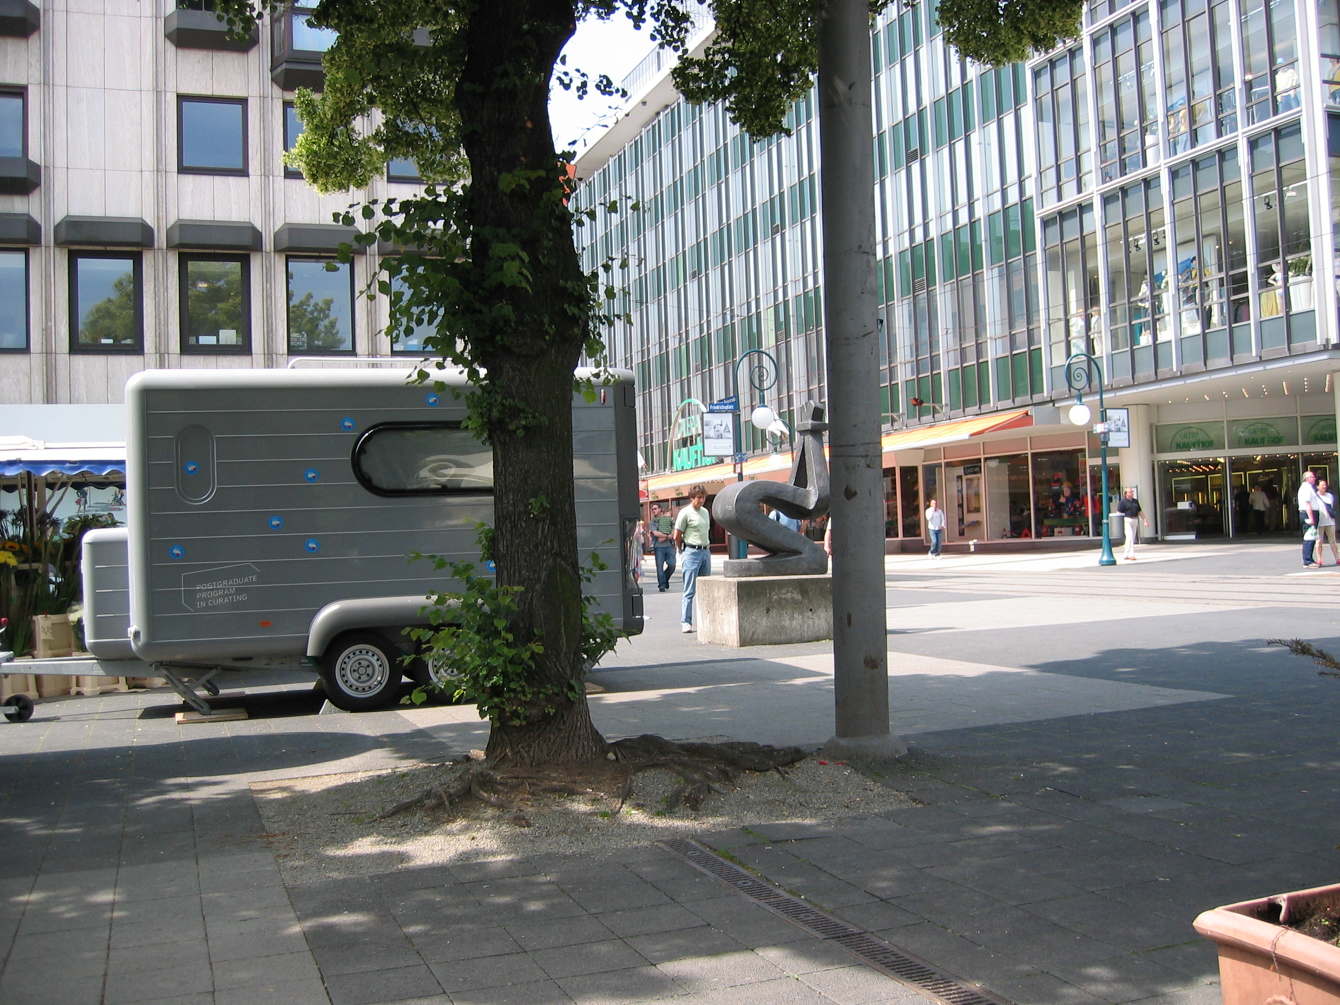 Ready Trade Trailer in Kassel during Doc 12